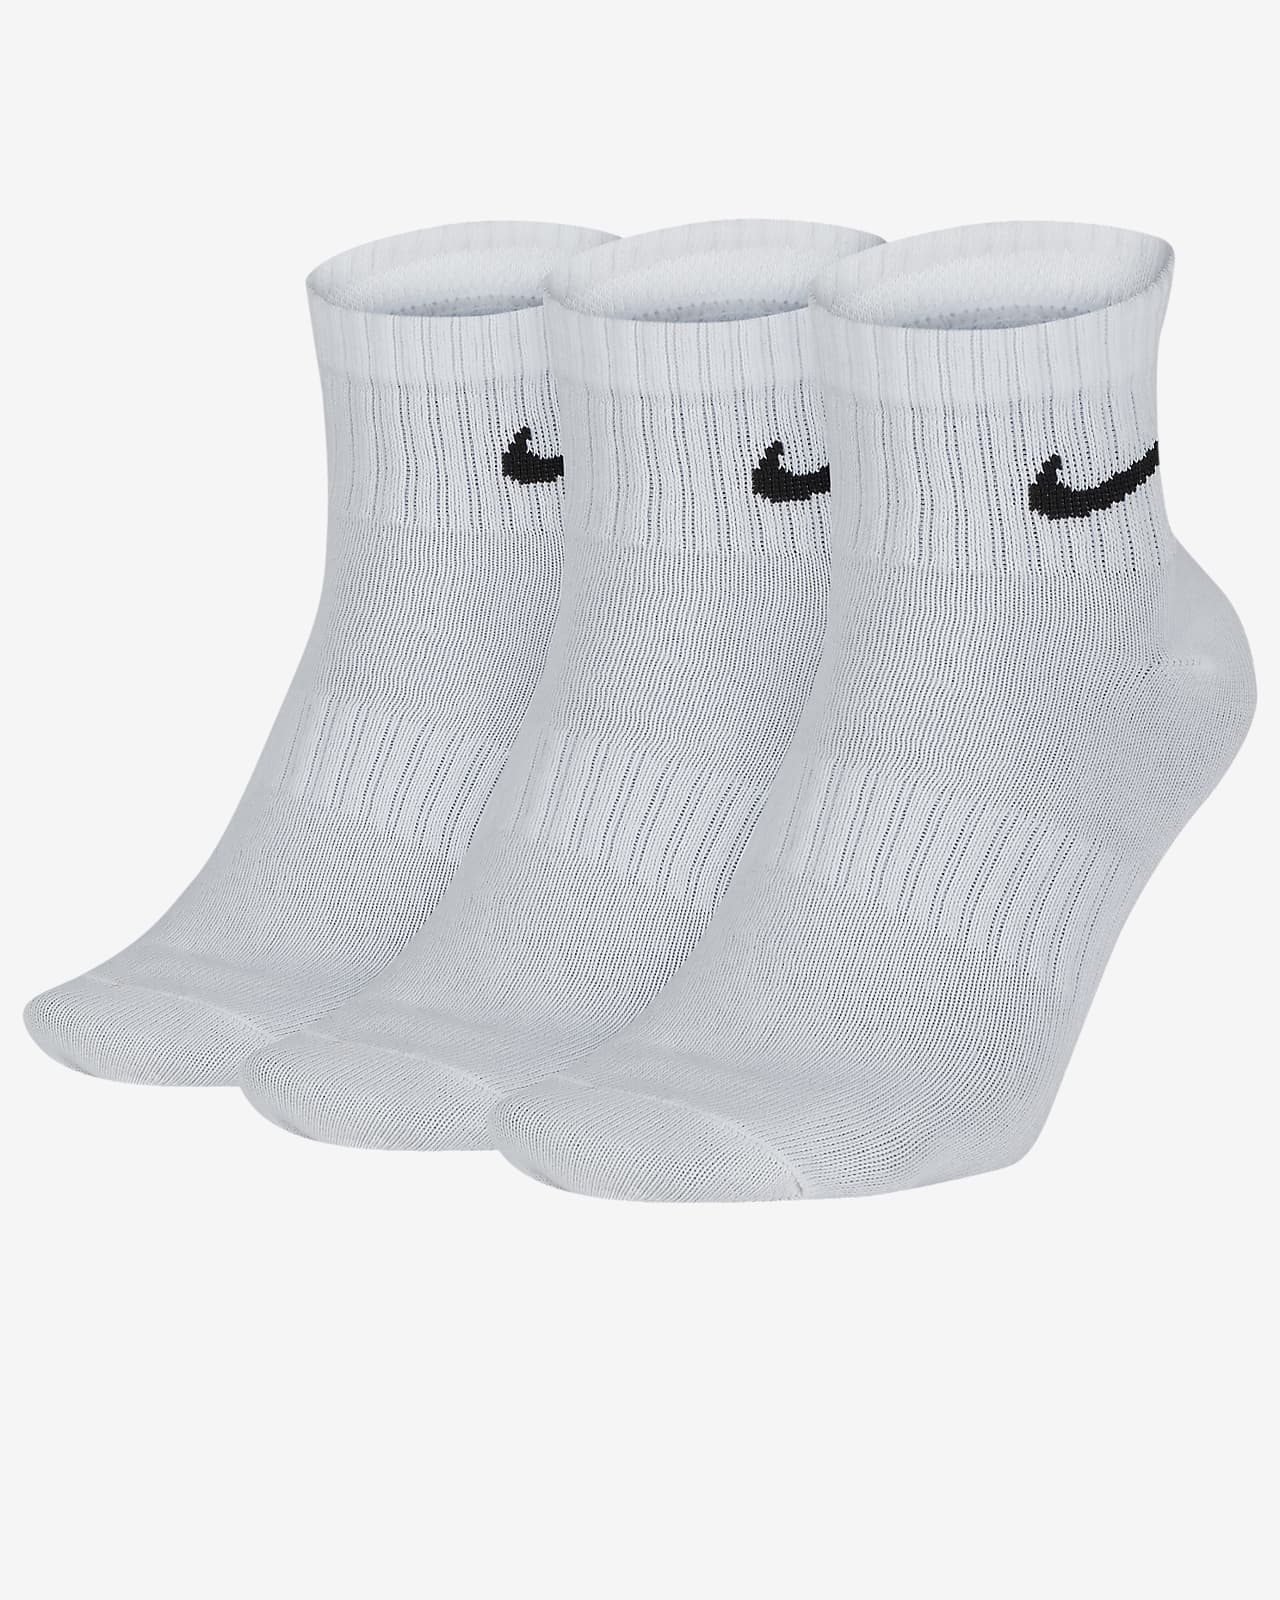 Chaussettes de training Nike Everyday Lightweight (3 paires)